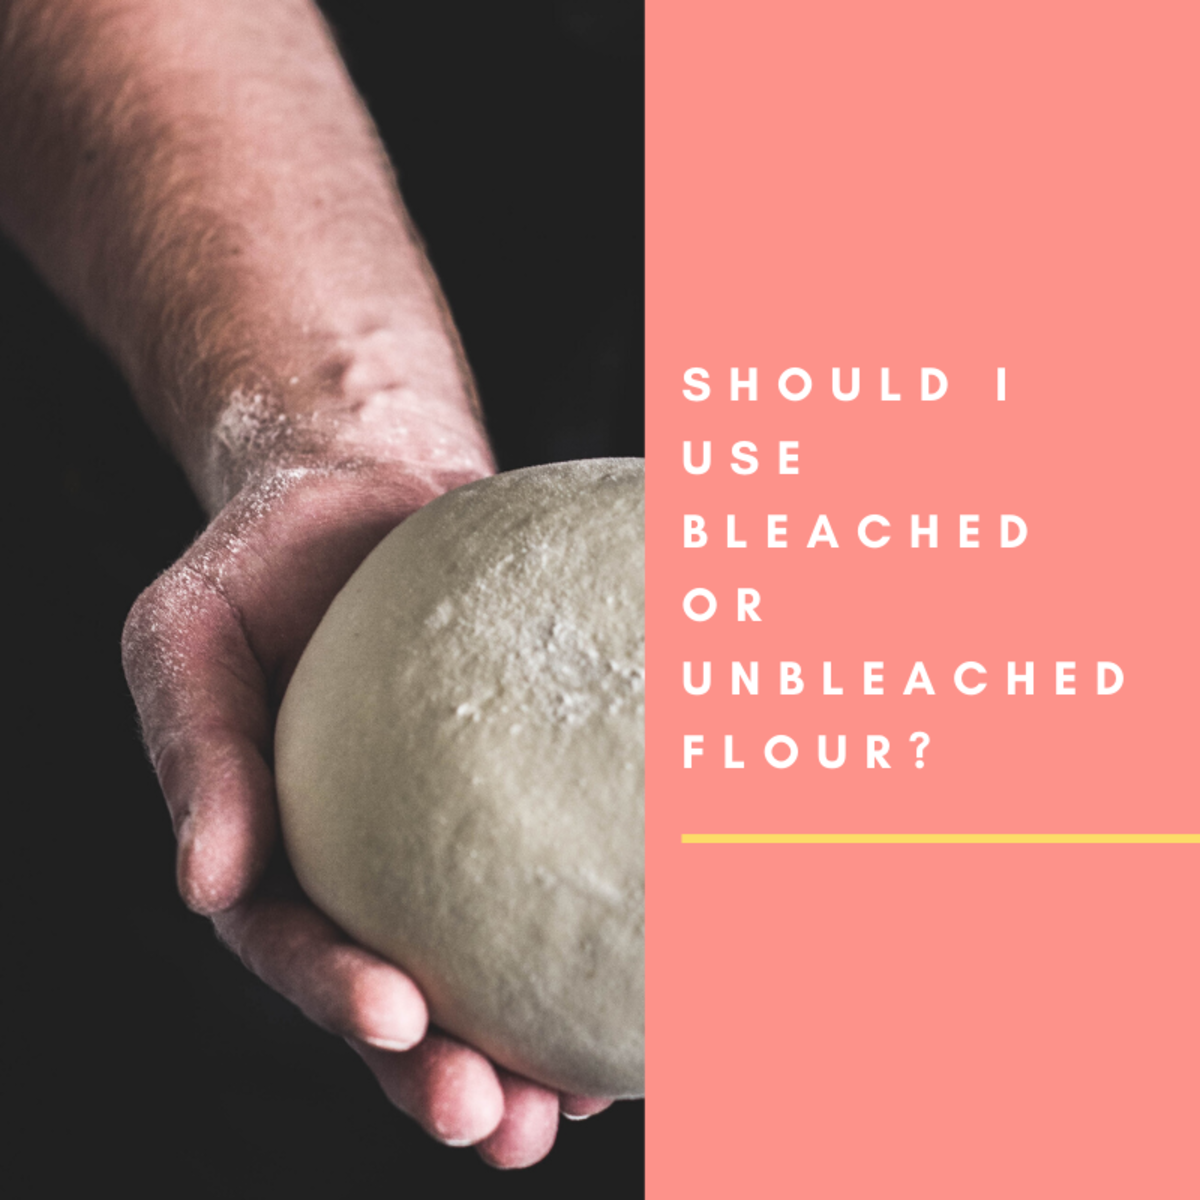 Learn which kind of flour to use to make your recipe perfect.